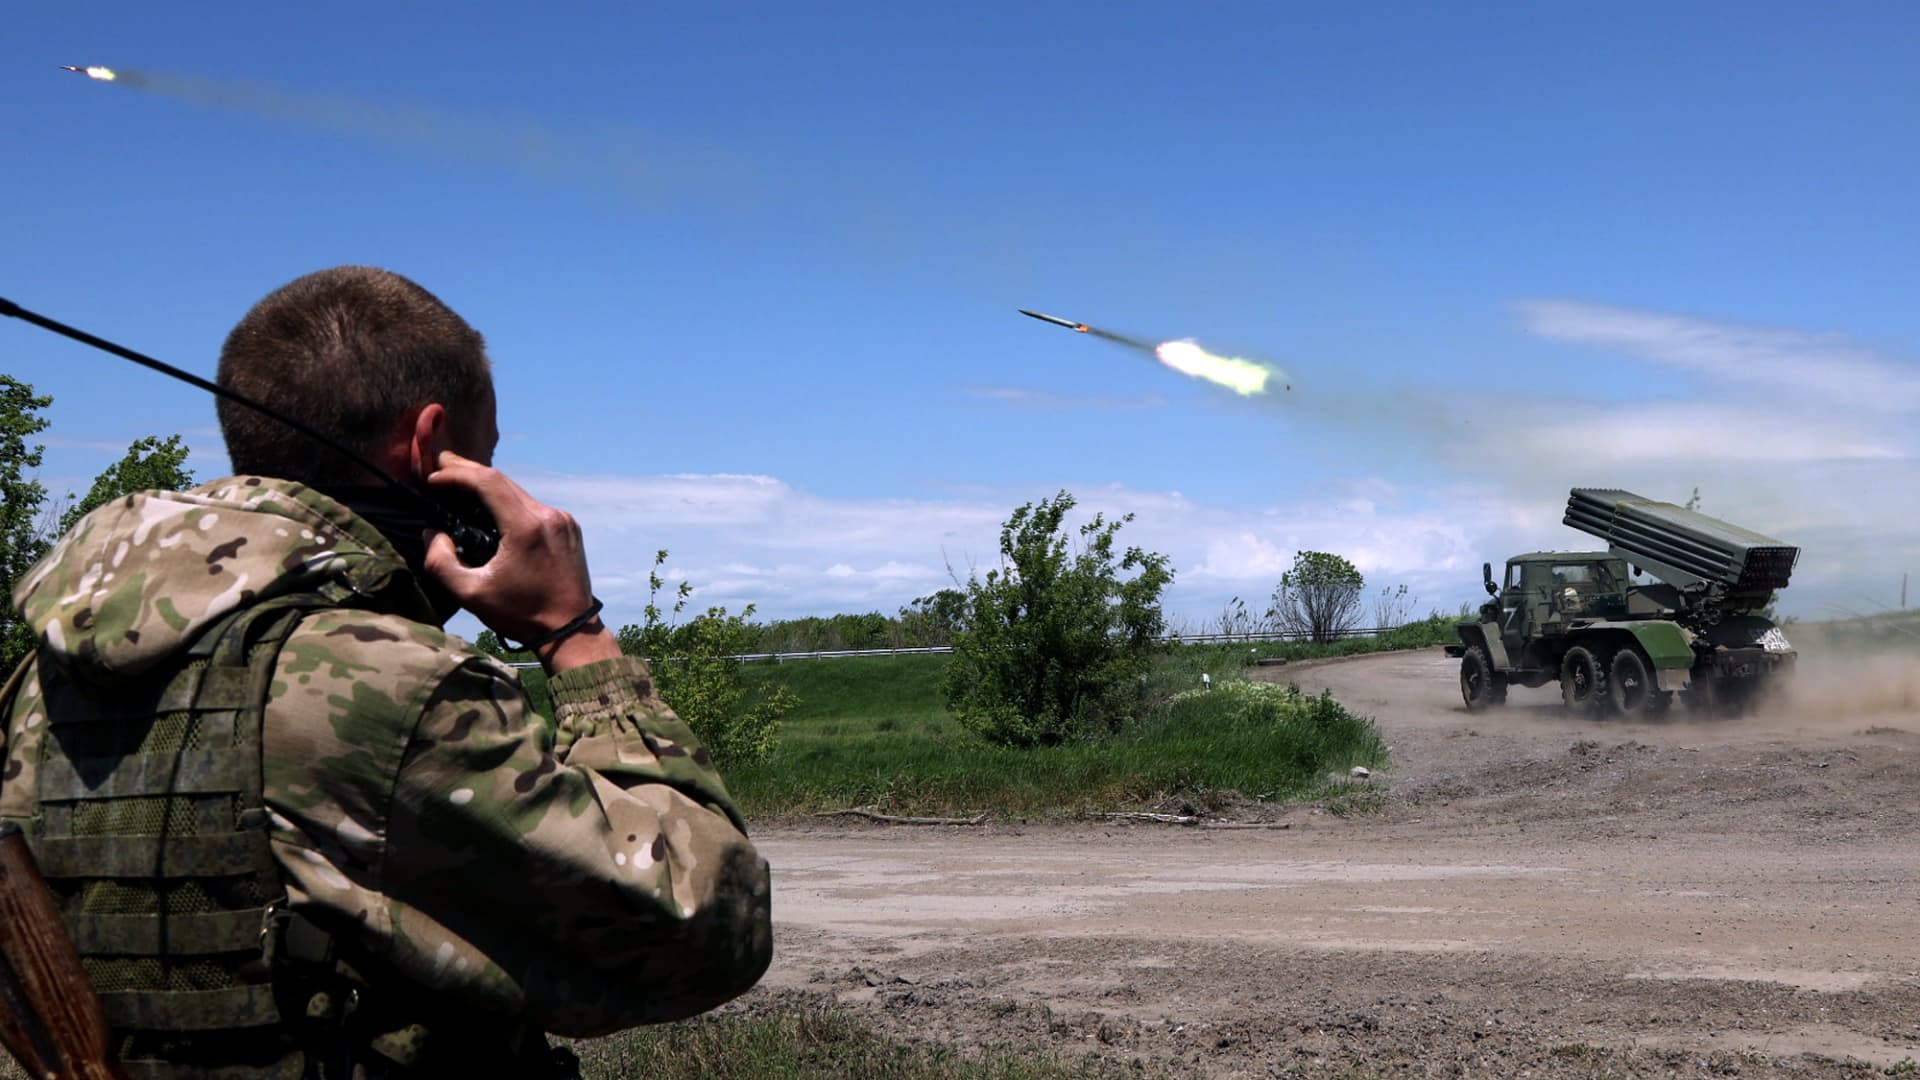 Pro-Russian separatist forces are seen in the Donetsk Oblast in eastern Ukraine on May 28, 2022.